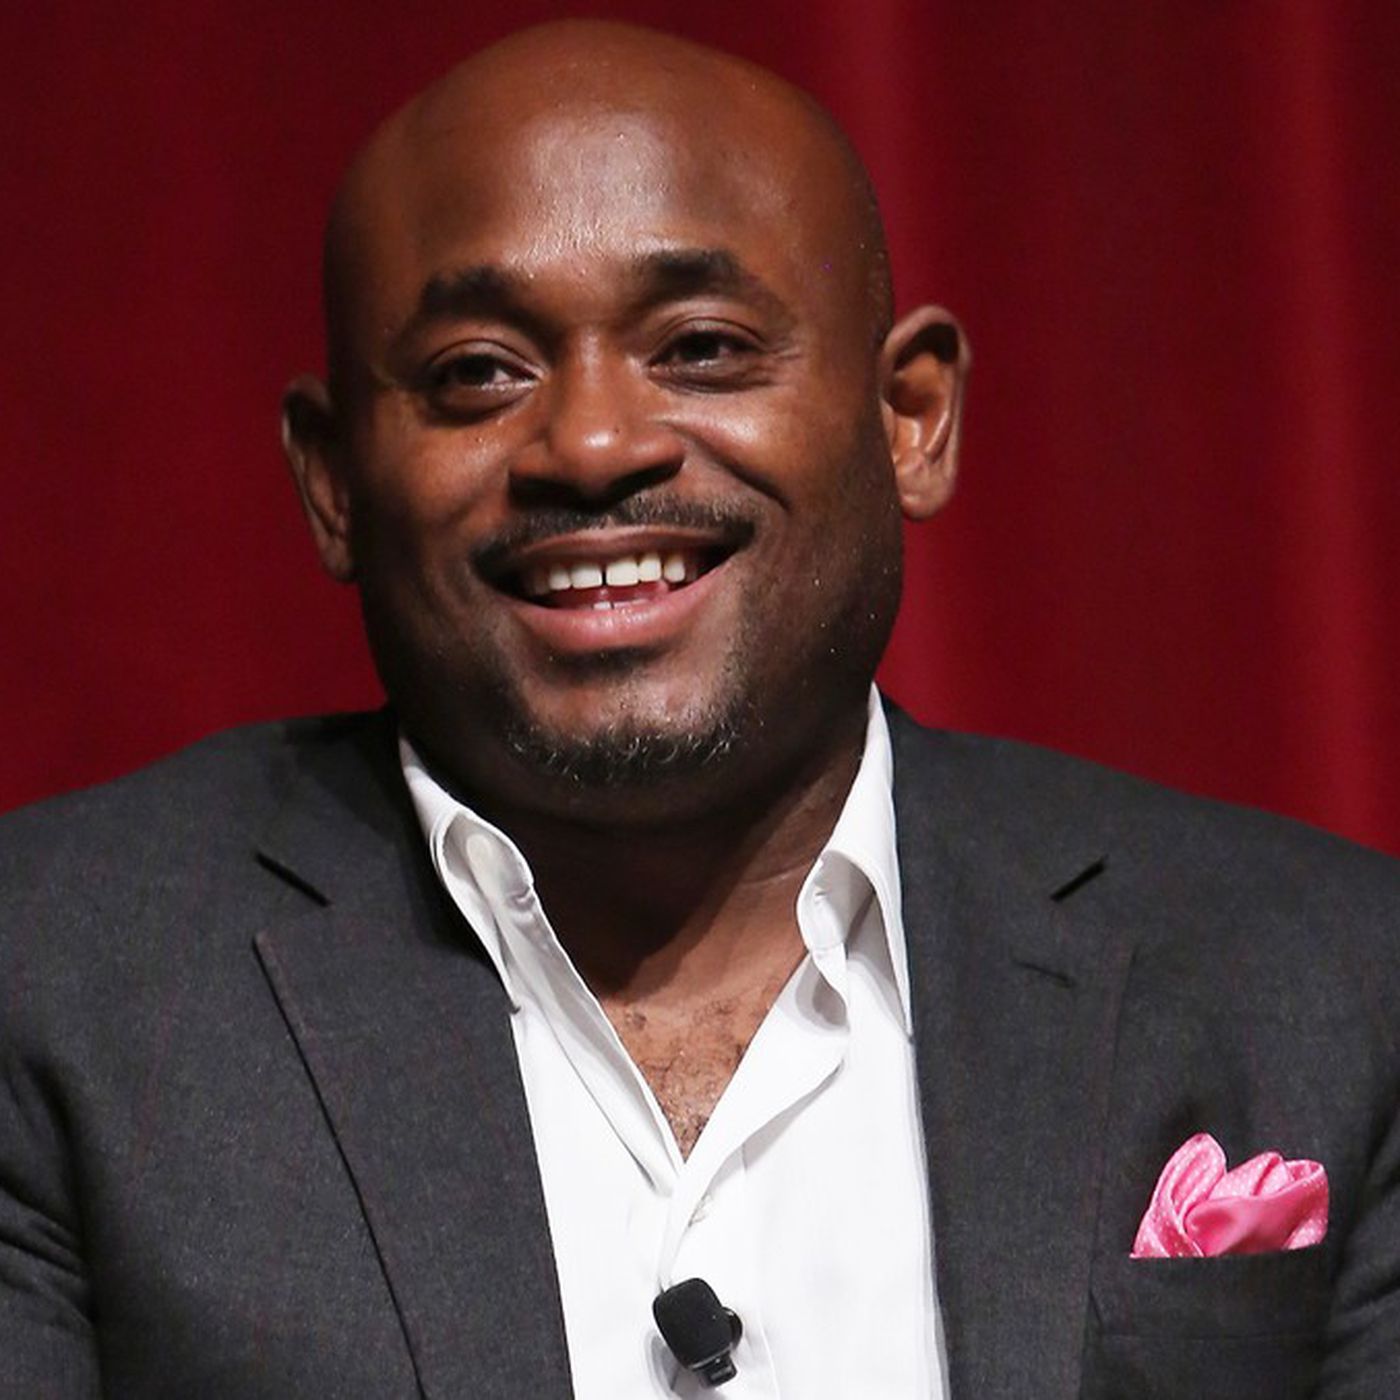 The 52-year old son of father (?) and mother(?) Steve Stoute in 2023 photo. Steve Stoute earned a  million dollar salary - leaving the net worth at  million in 2023